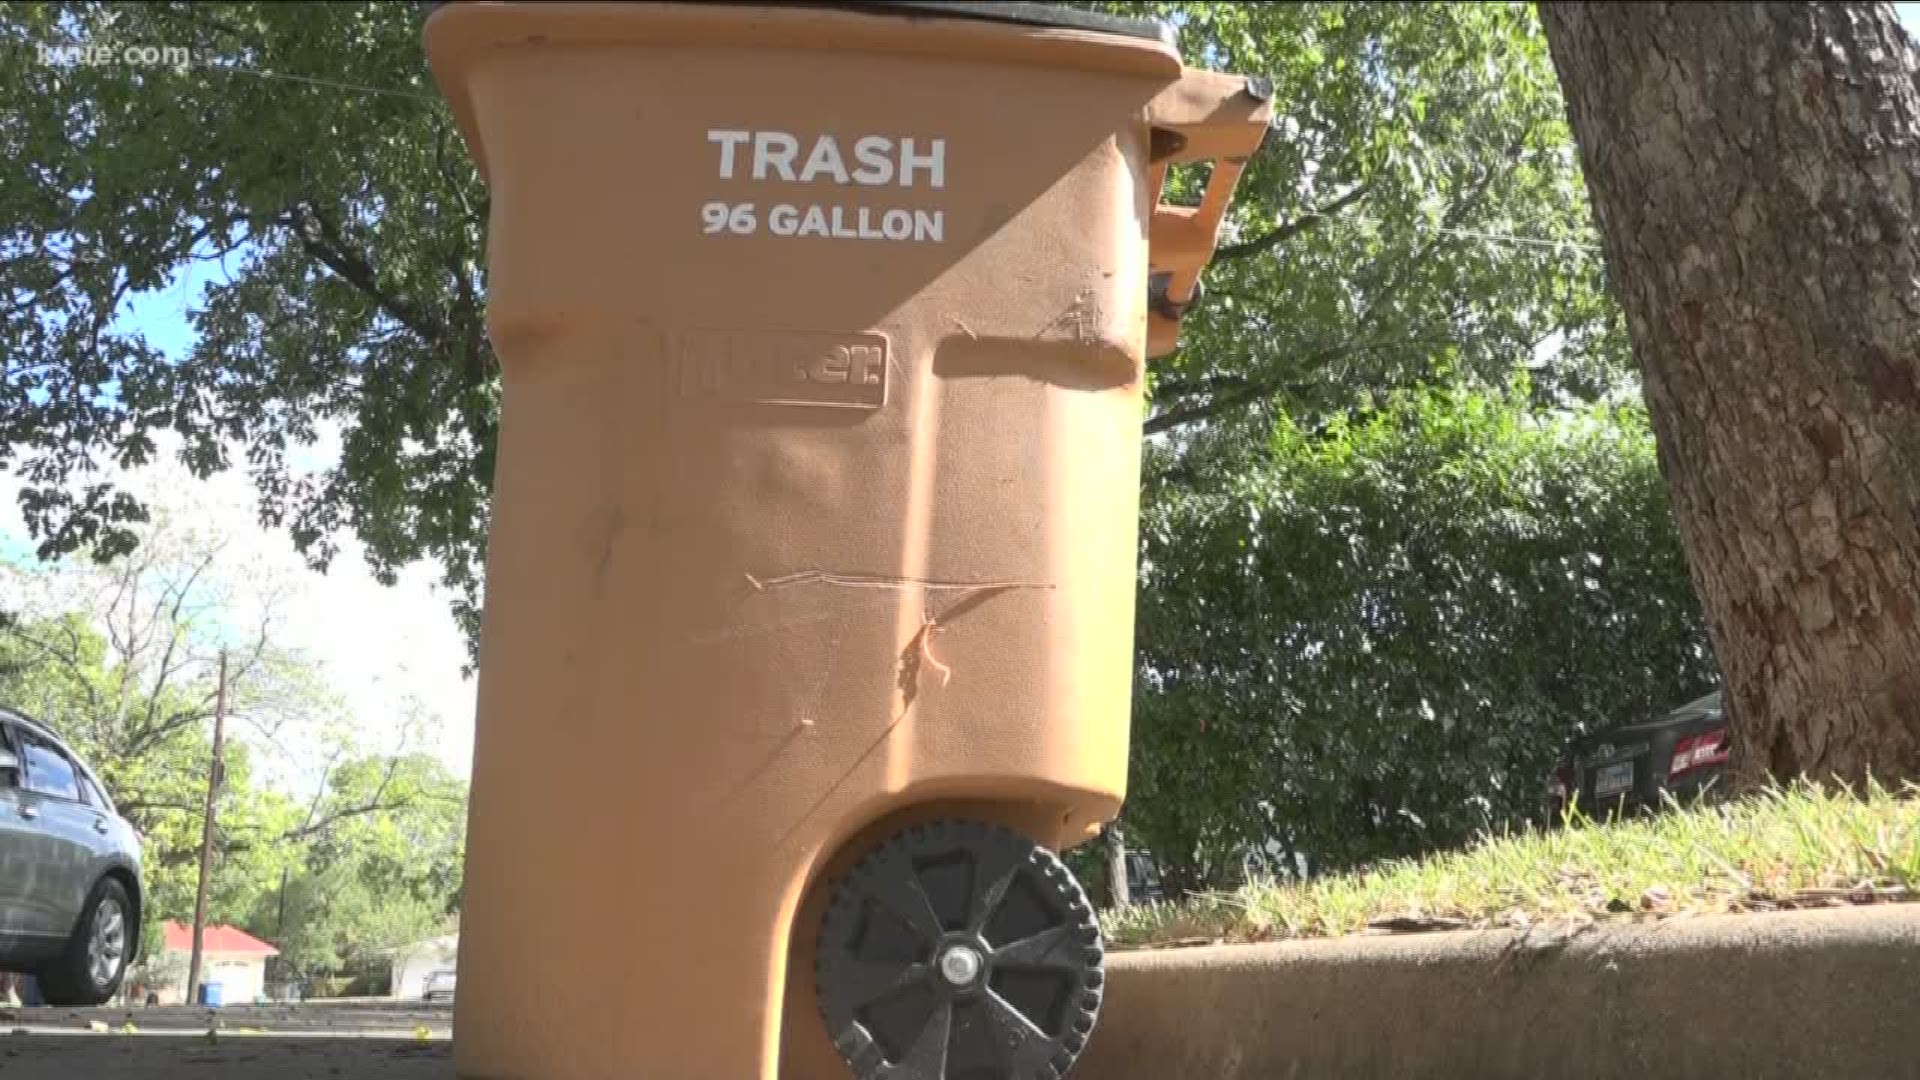 We are a week into the city's new budget and if you pay to have your trash collected, you're going to see a bigger bill starting this month.